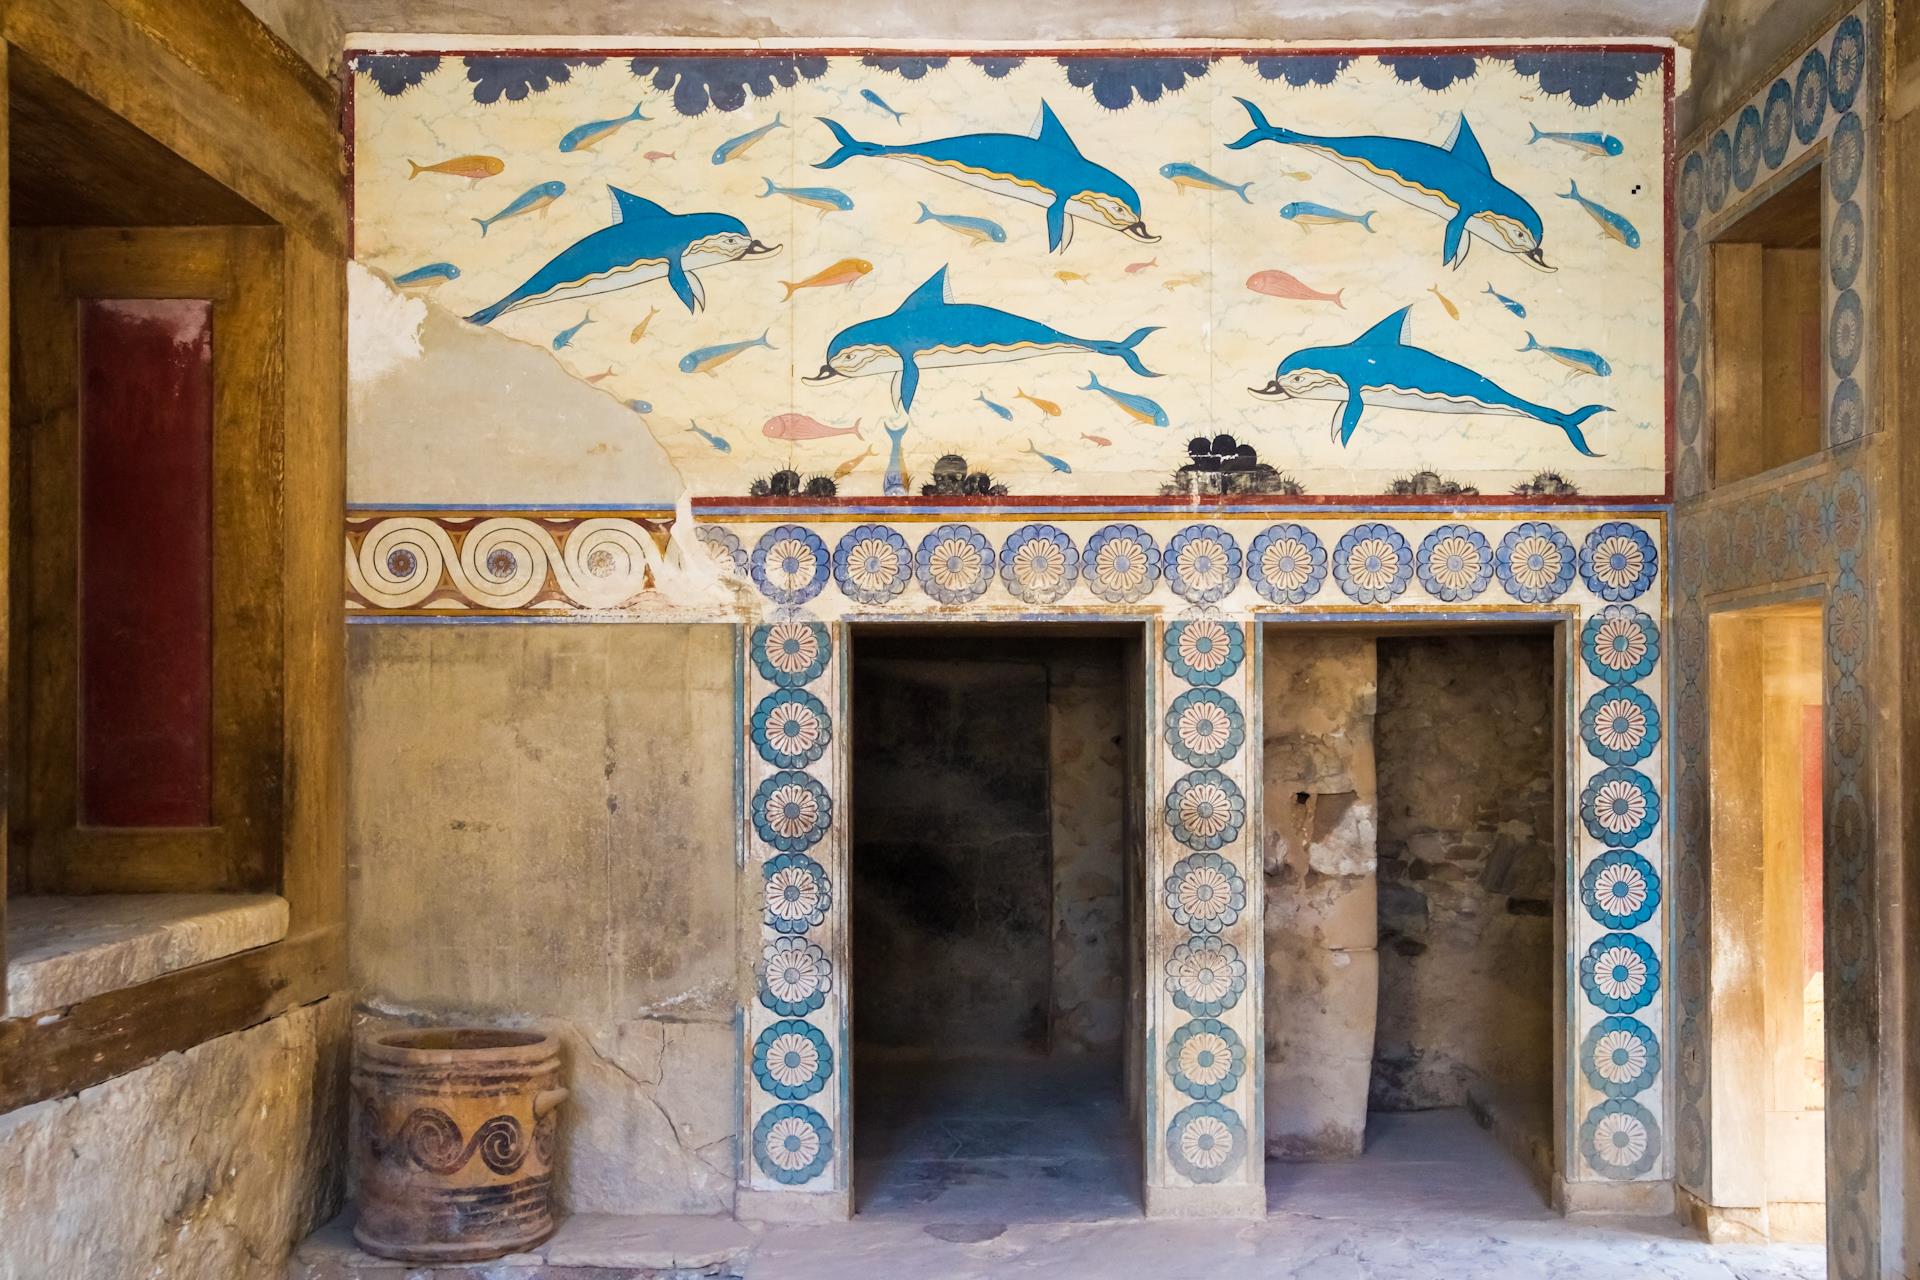 Dolphins fresco in the Palace of Knossos KNOSSOS (Minoan settlement) CRETE